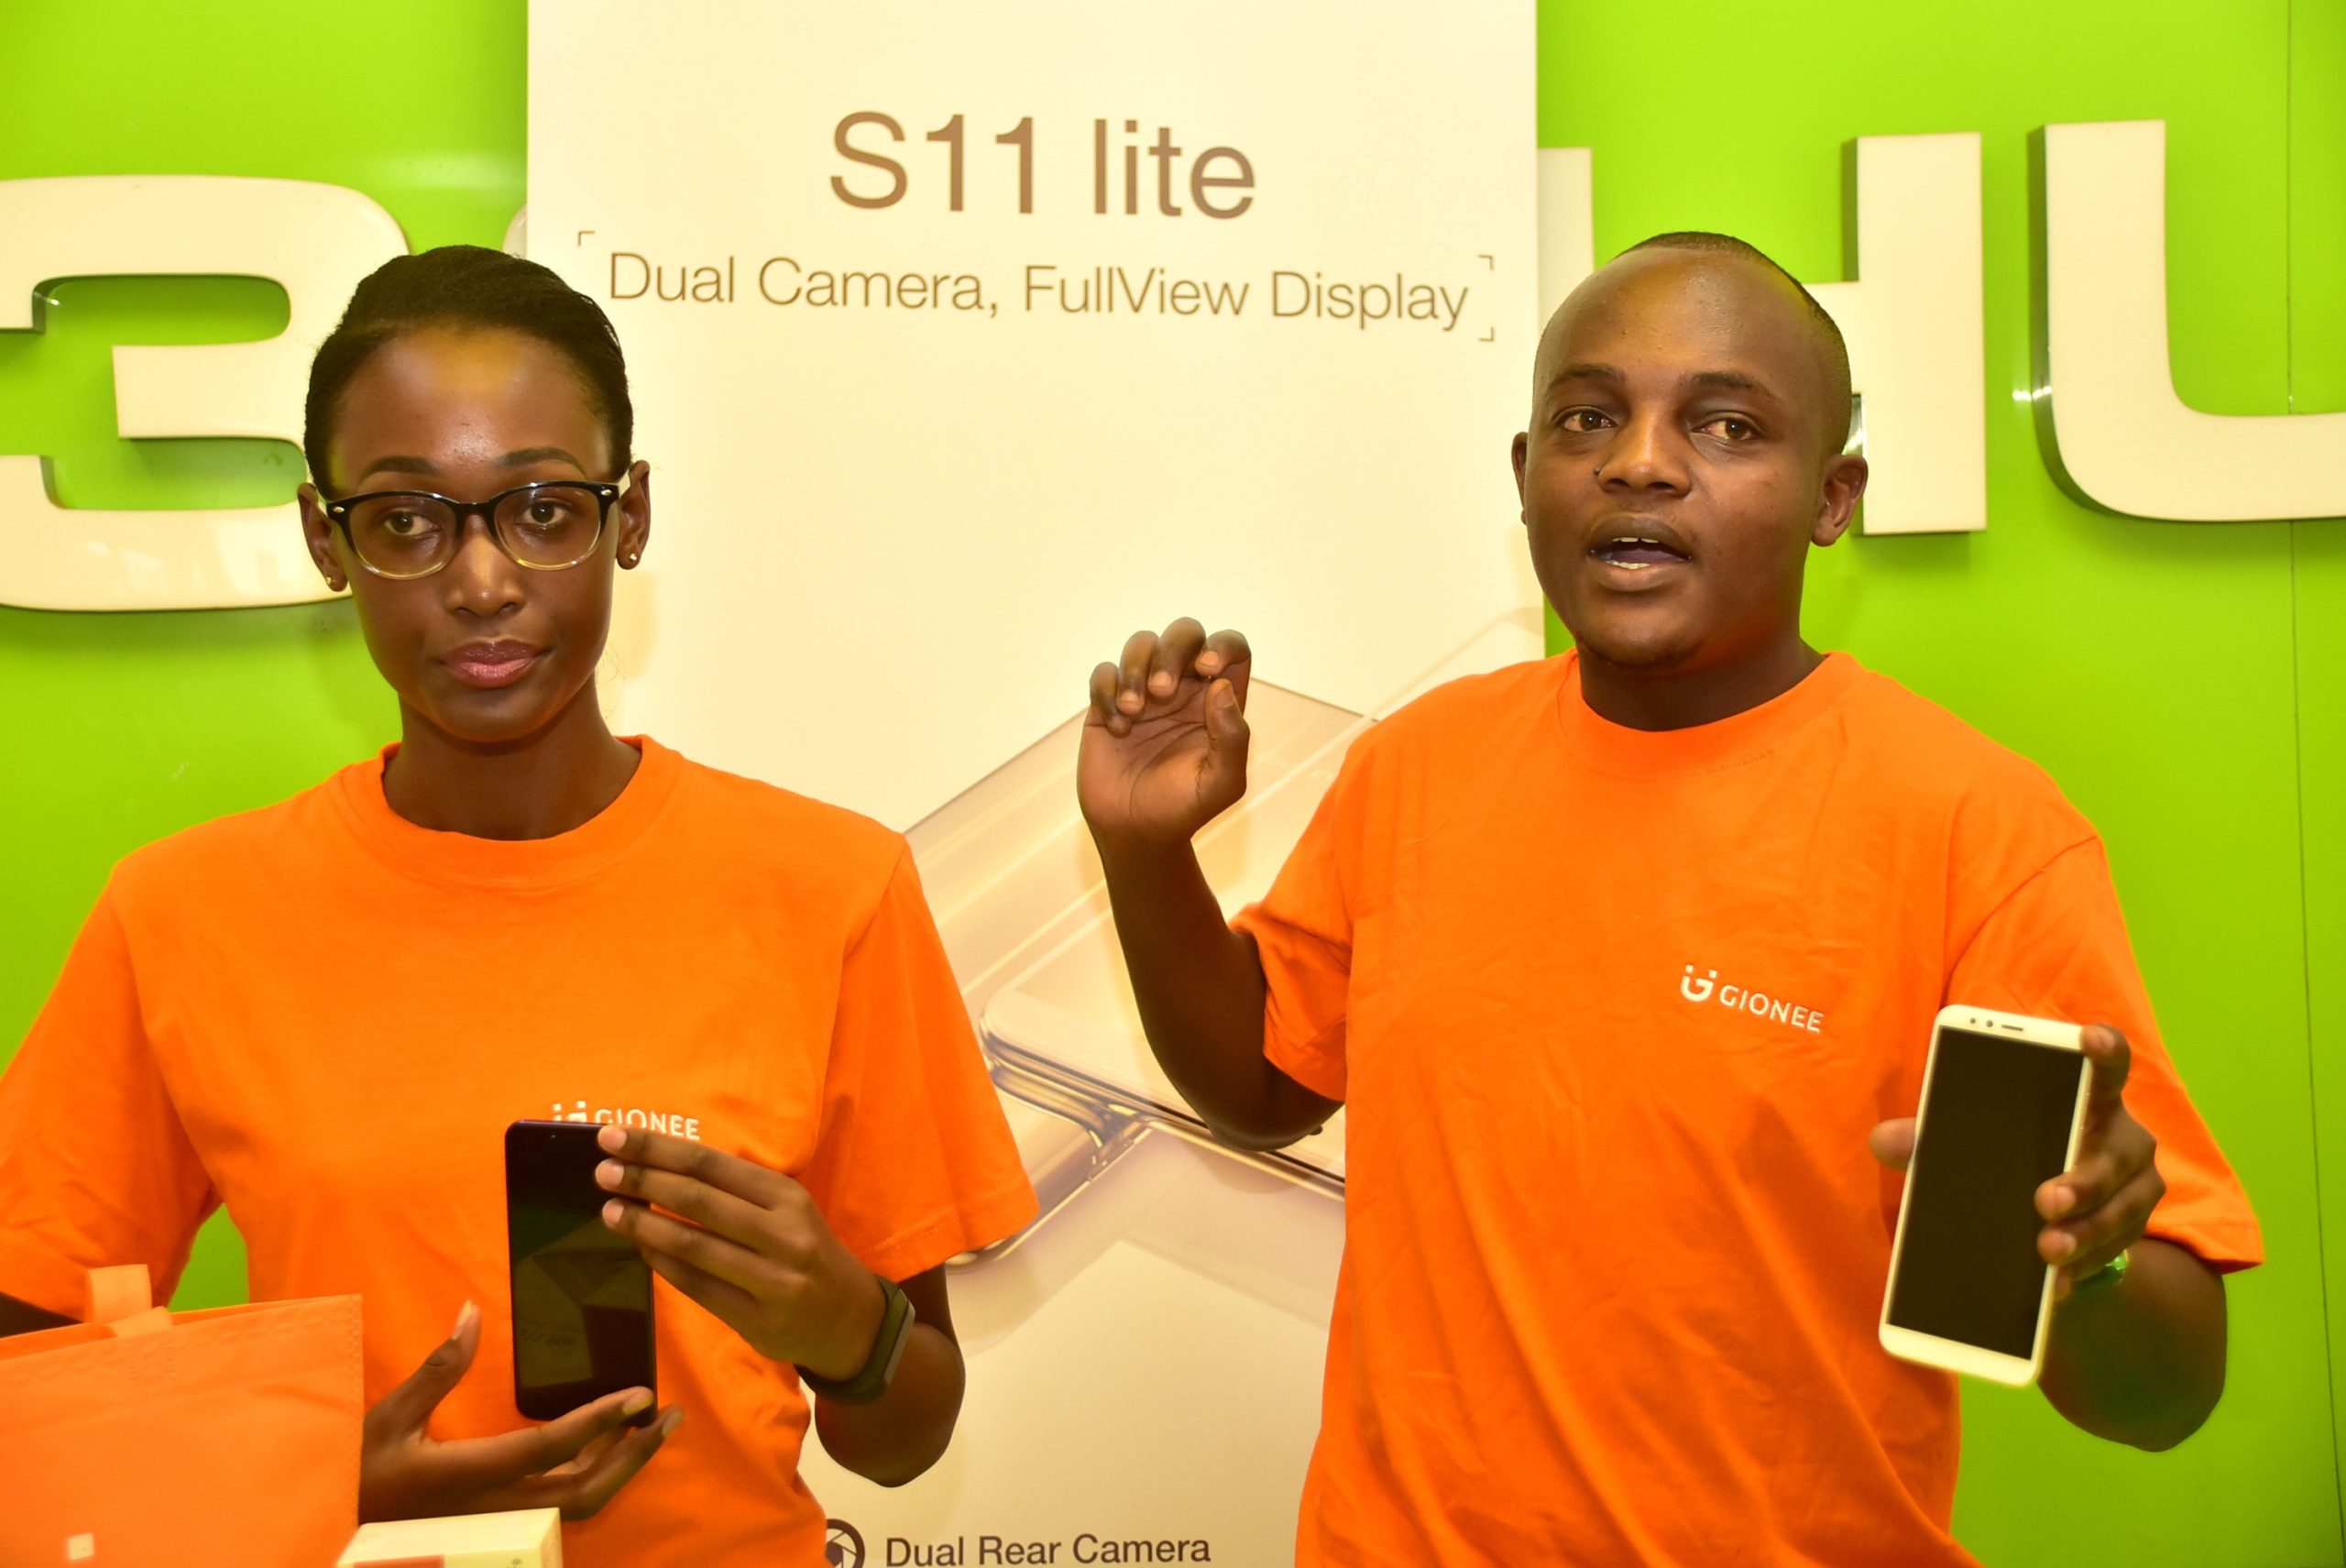 Gionee Kenya training manager Clinton Kasuti right speaks during the launch of the Gionee S11 Lite smartphone as Whitney Azande from Gionee kenya office looks on scaled